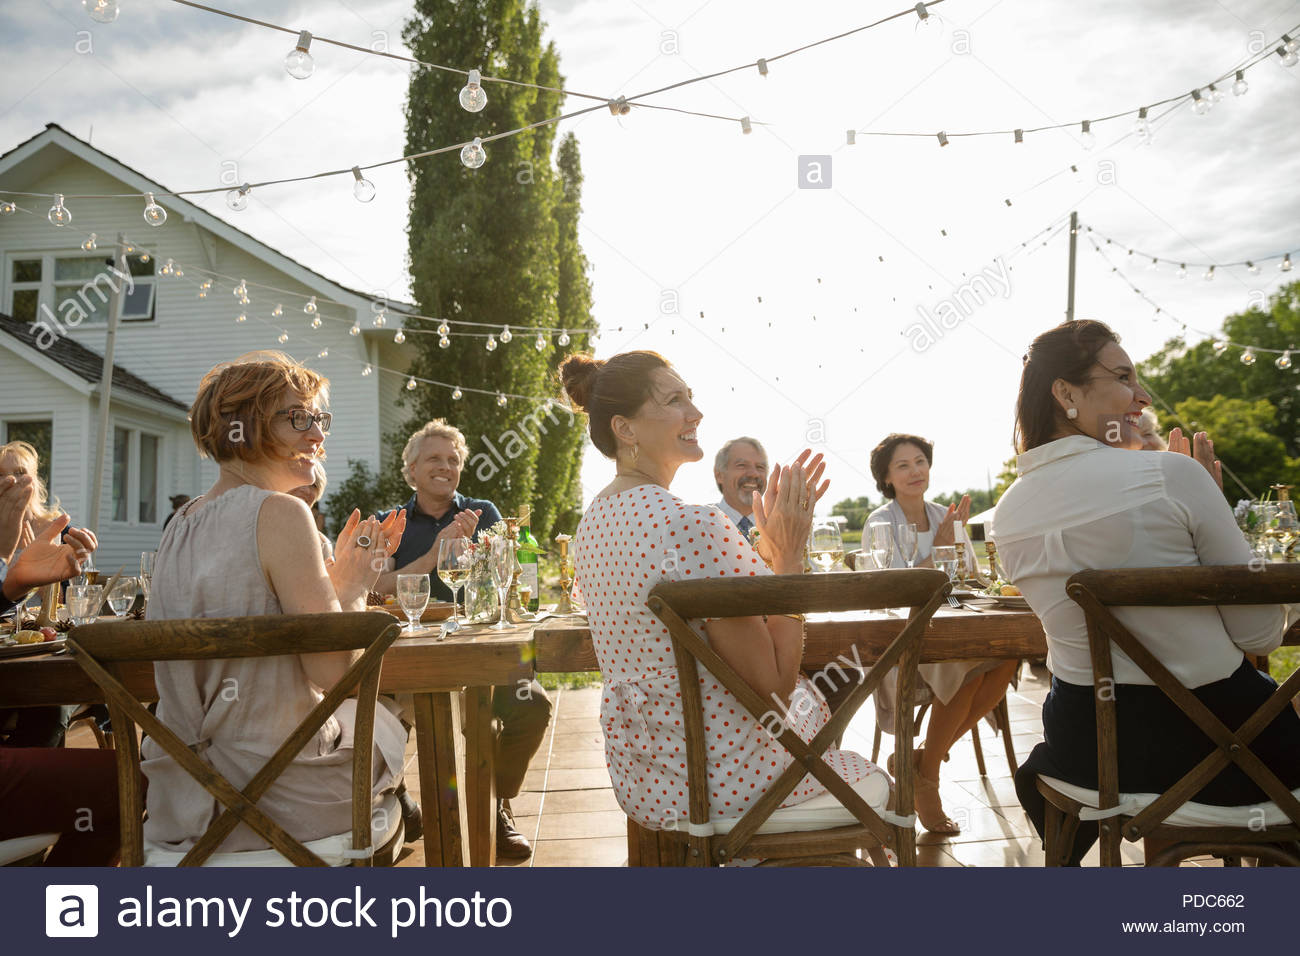 Friends clapping, celebrating at garden party table Stock Photo